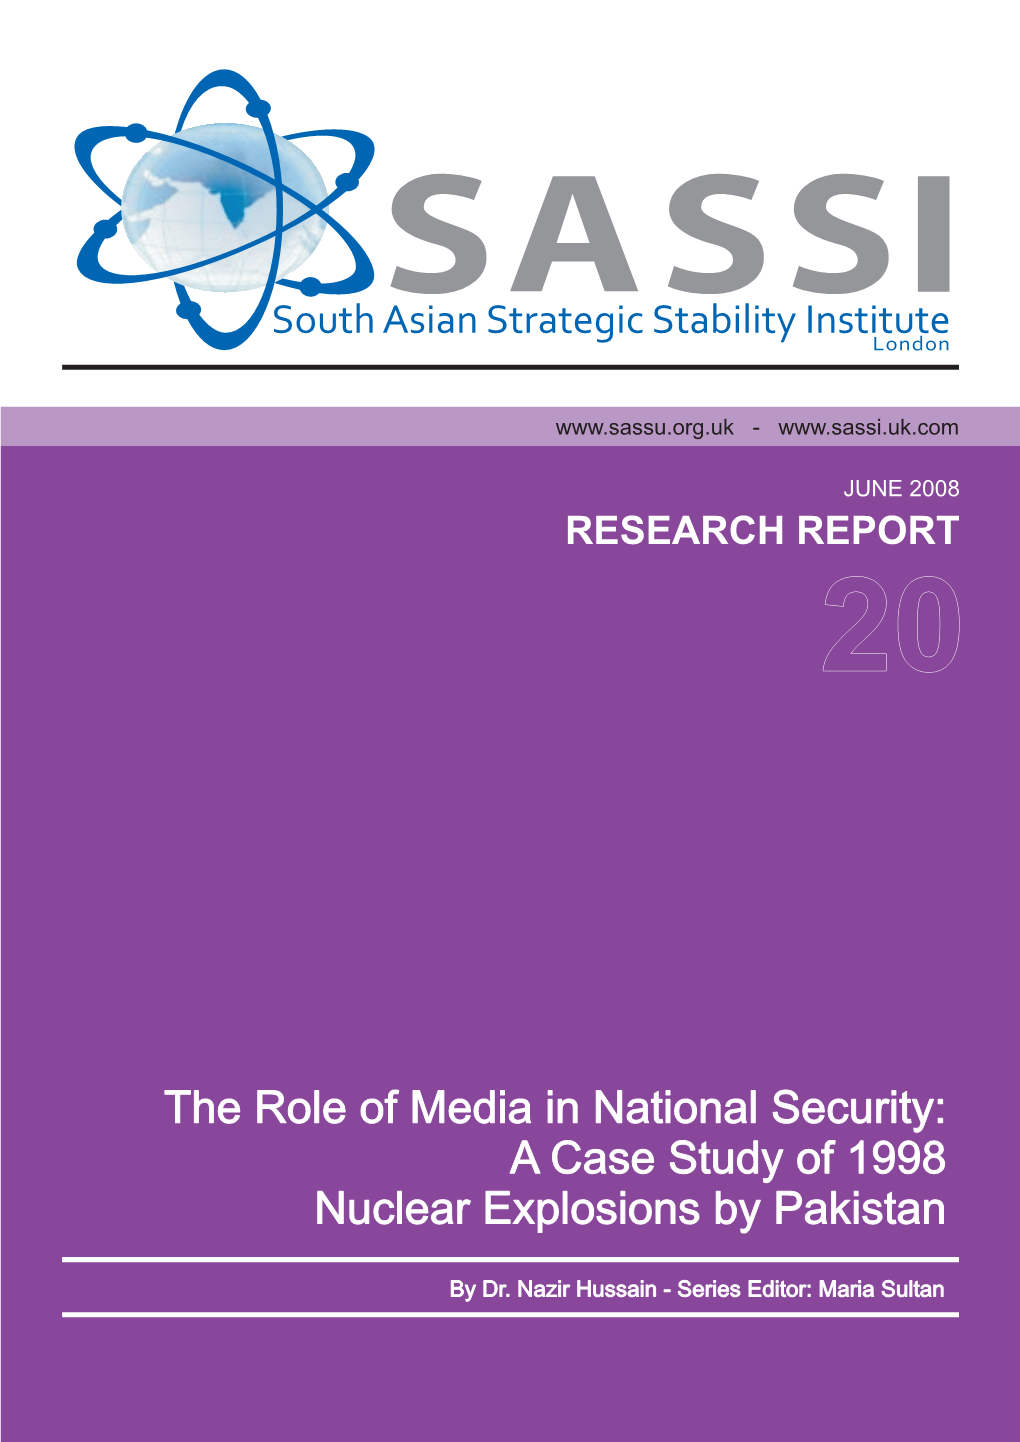 The Role of Media in National Security: a Case Study of 1998 Nuclear Explosions by Pakistan